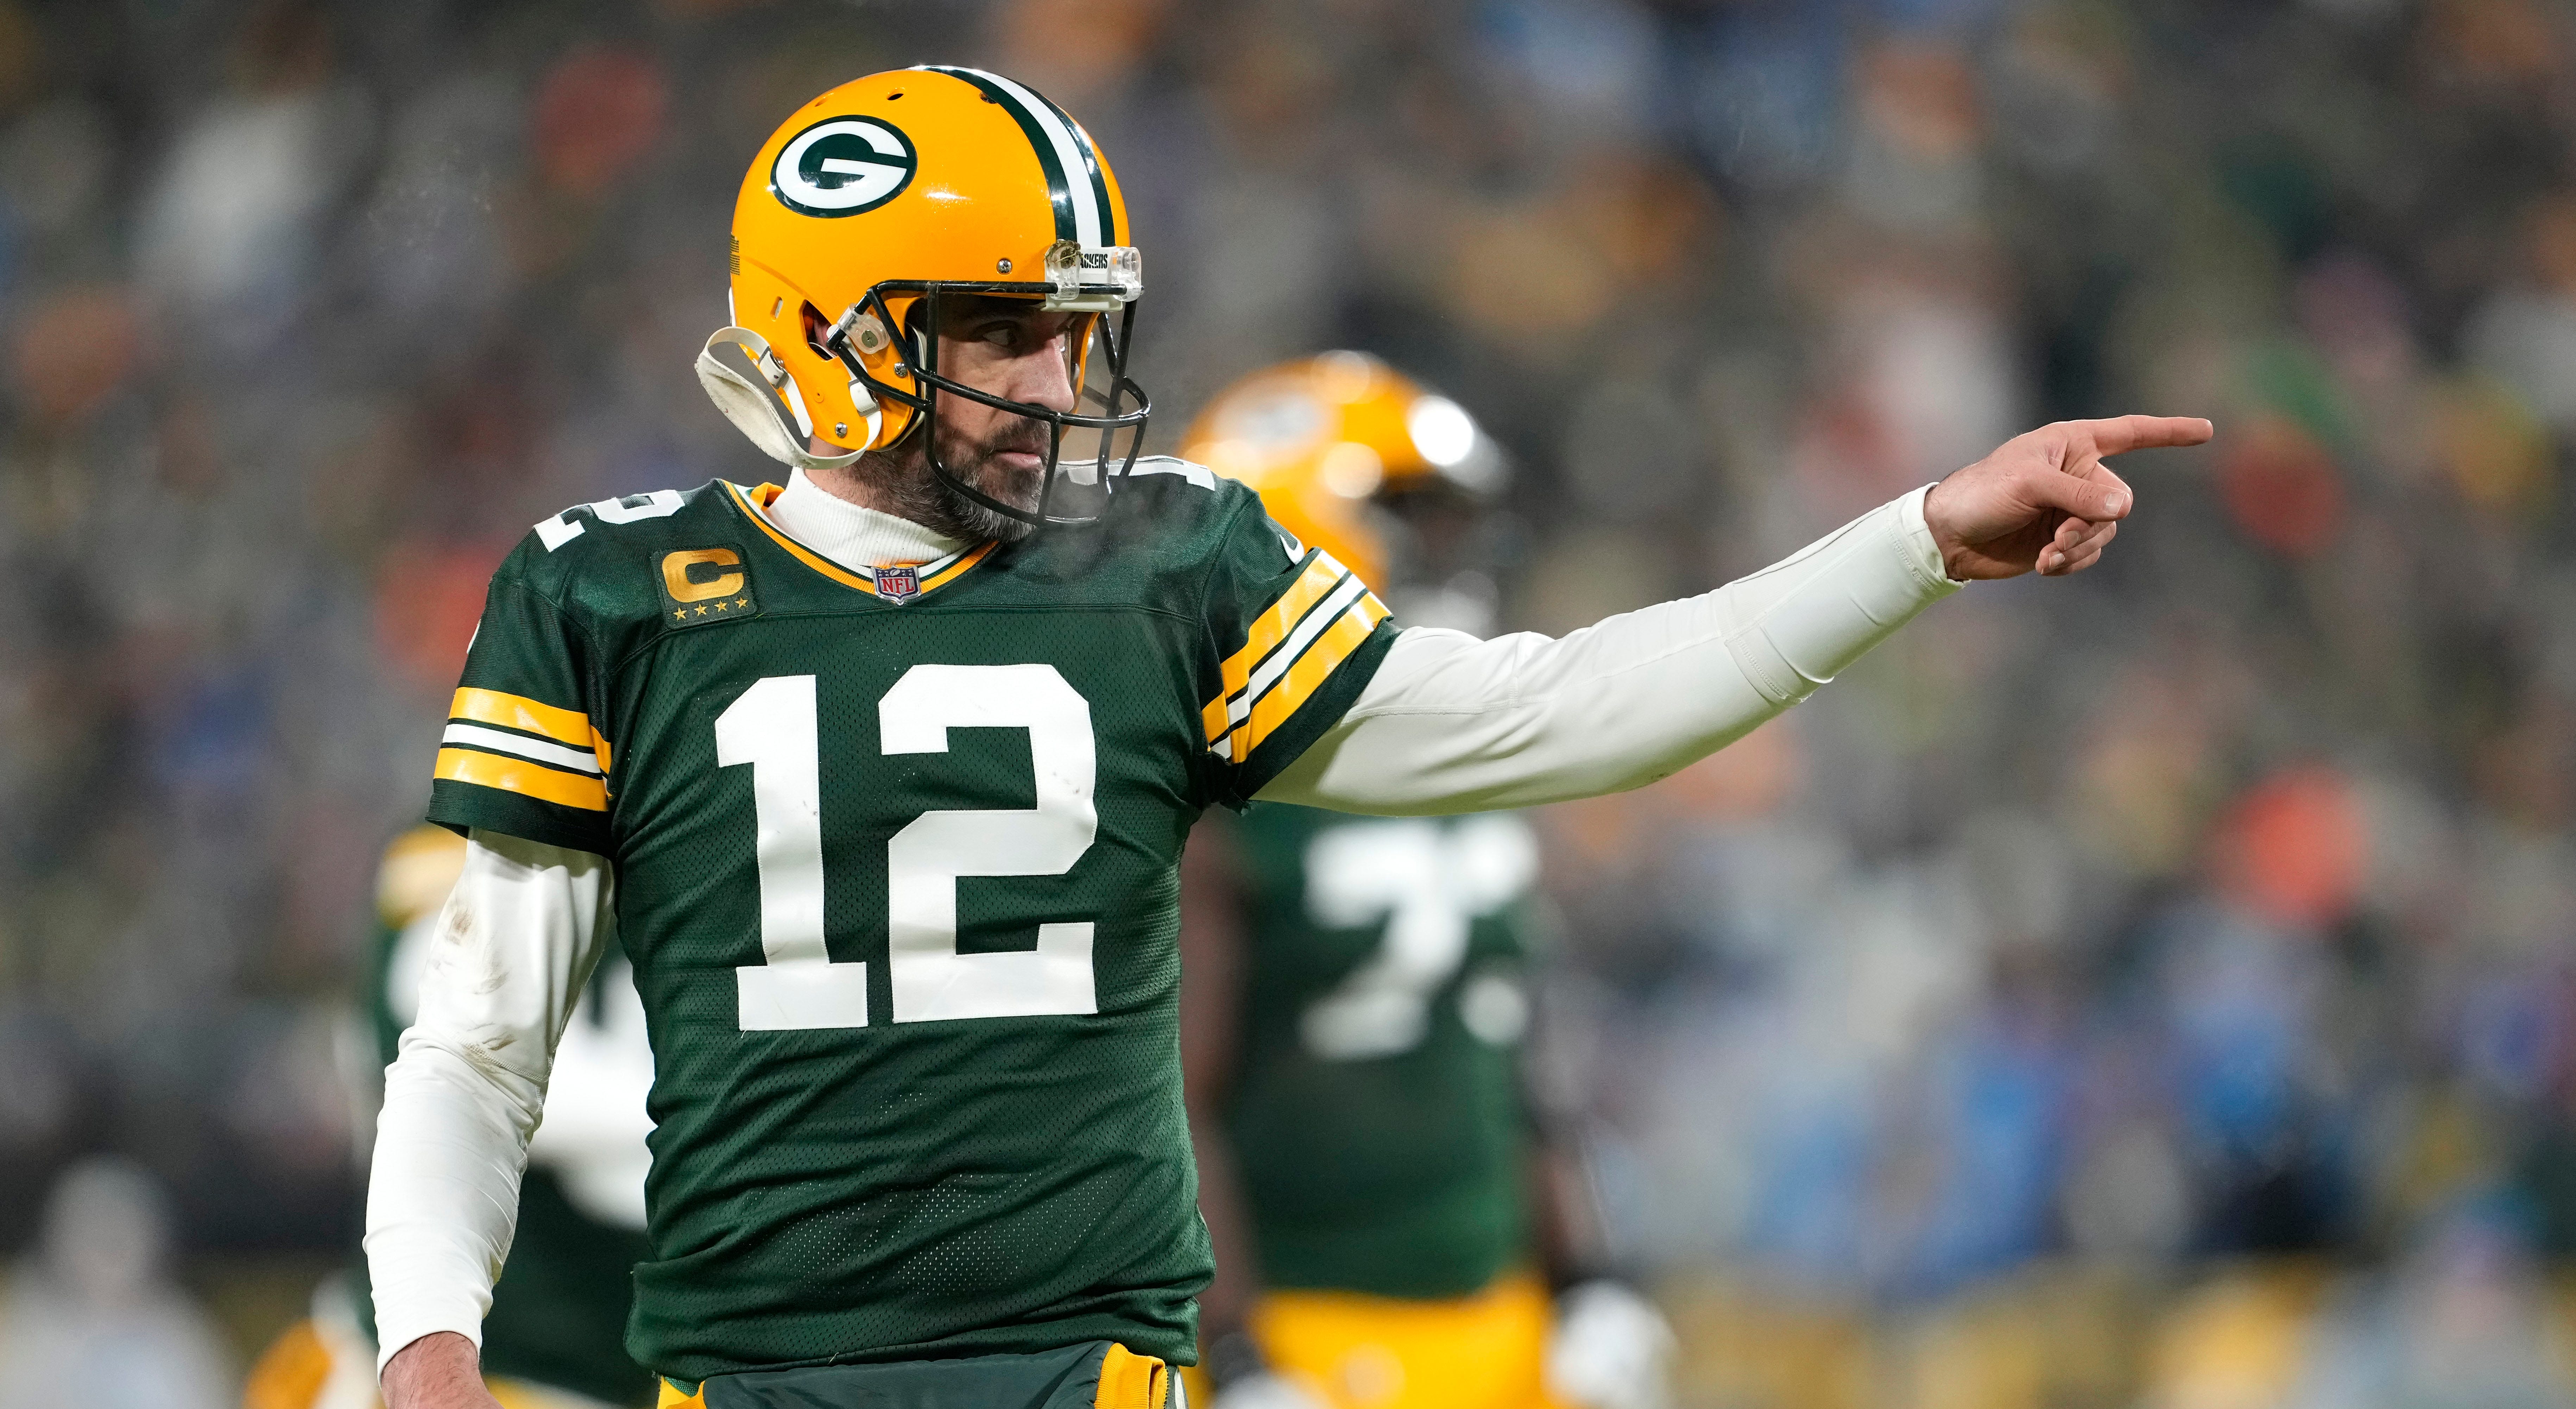 Aaron Rodgers denies jersey swap after loss to Lions, retirement speculation begins